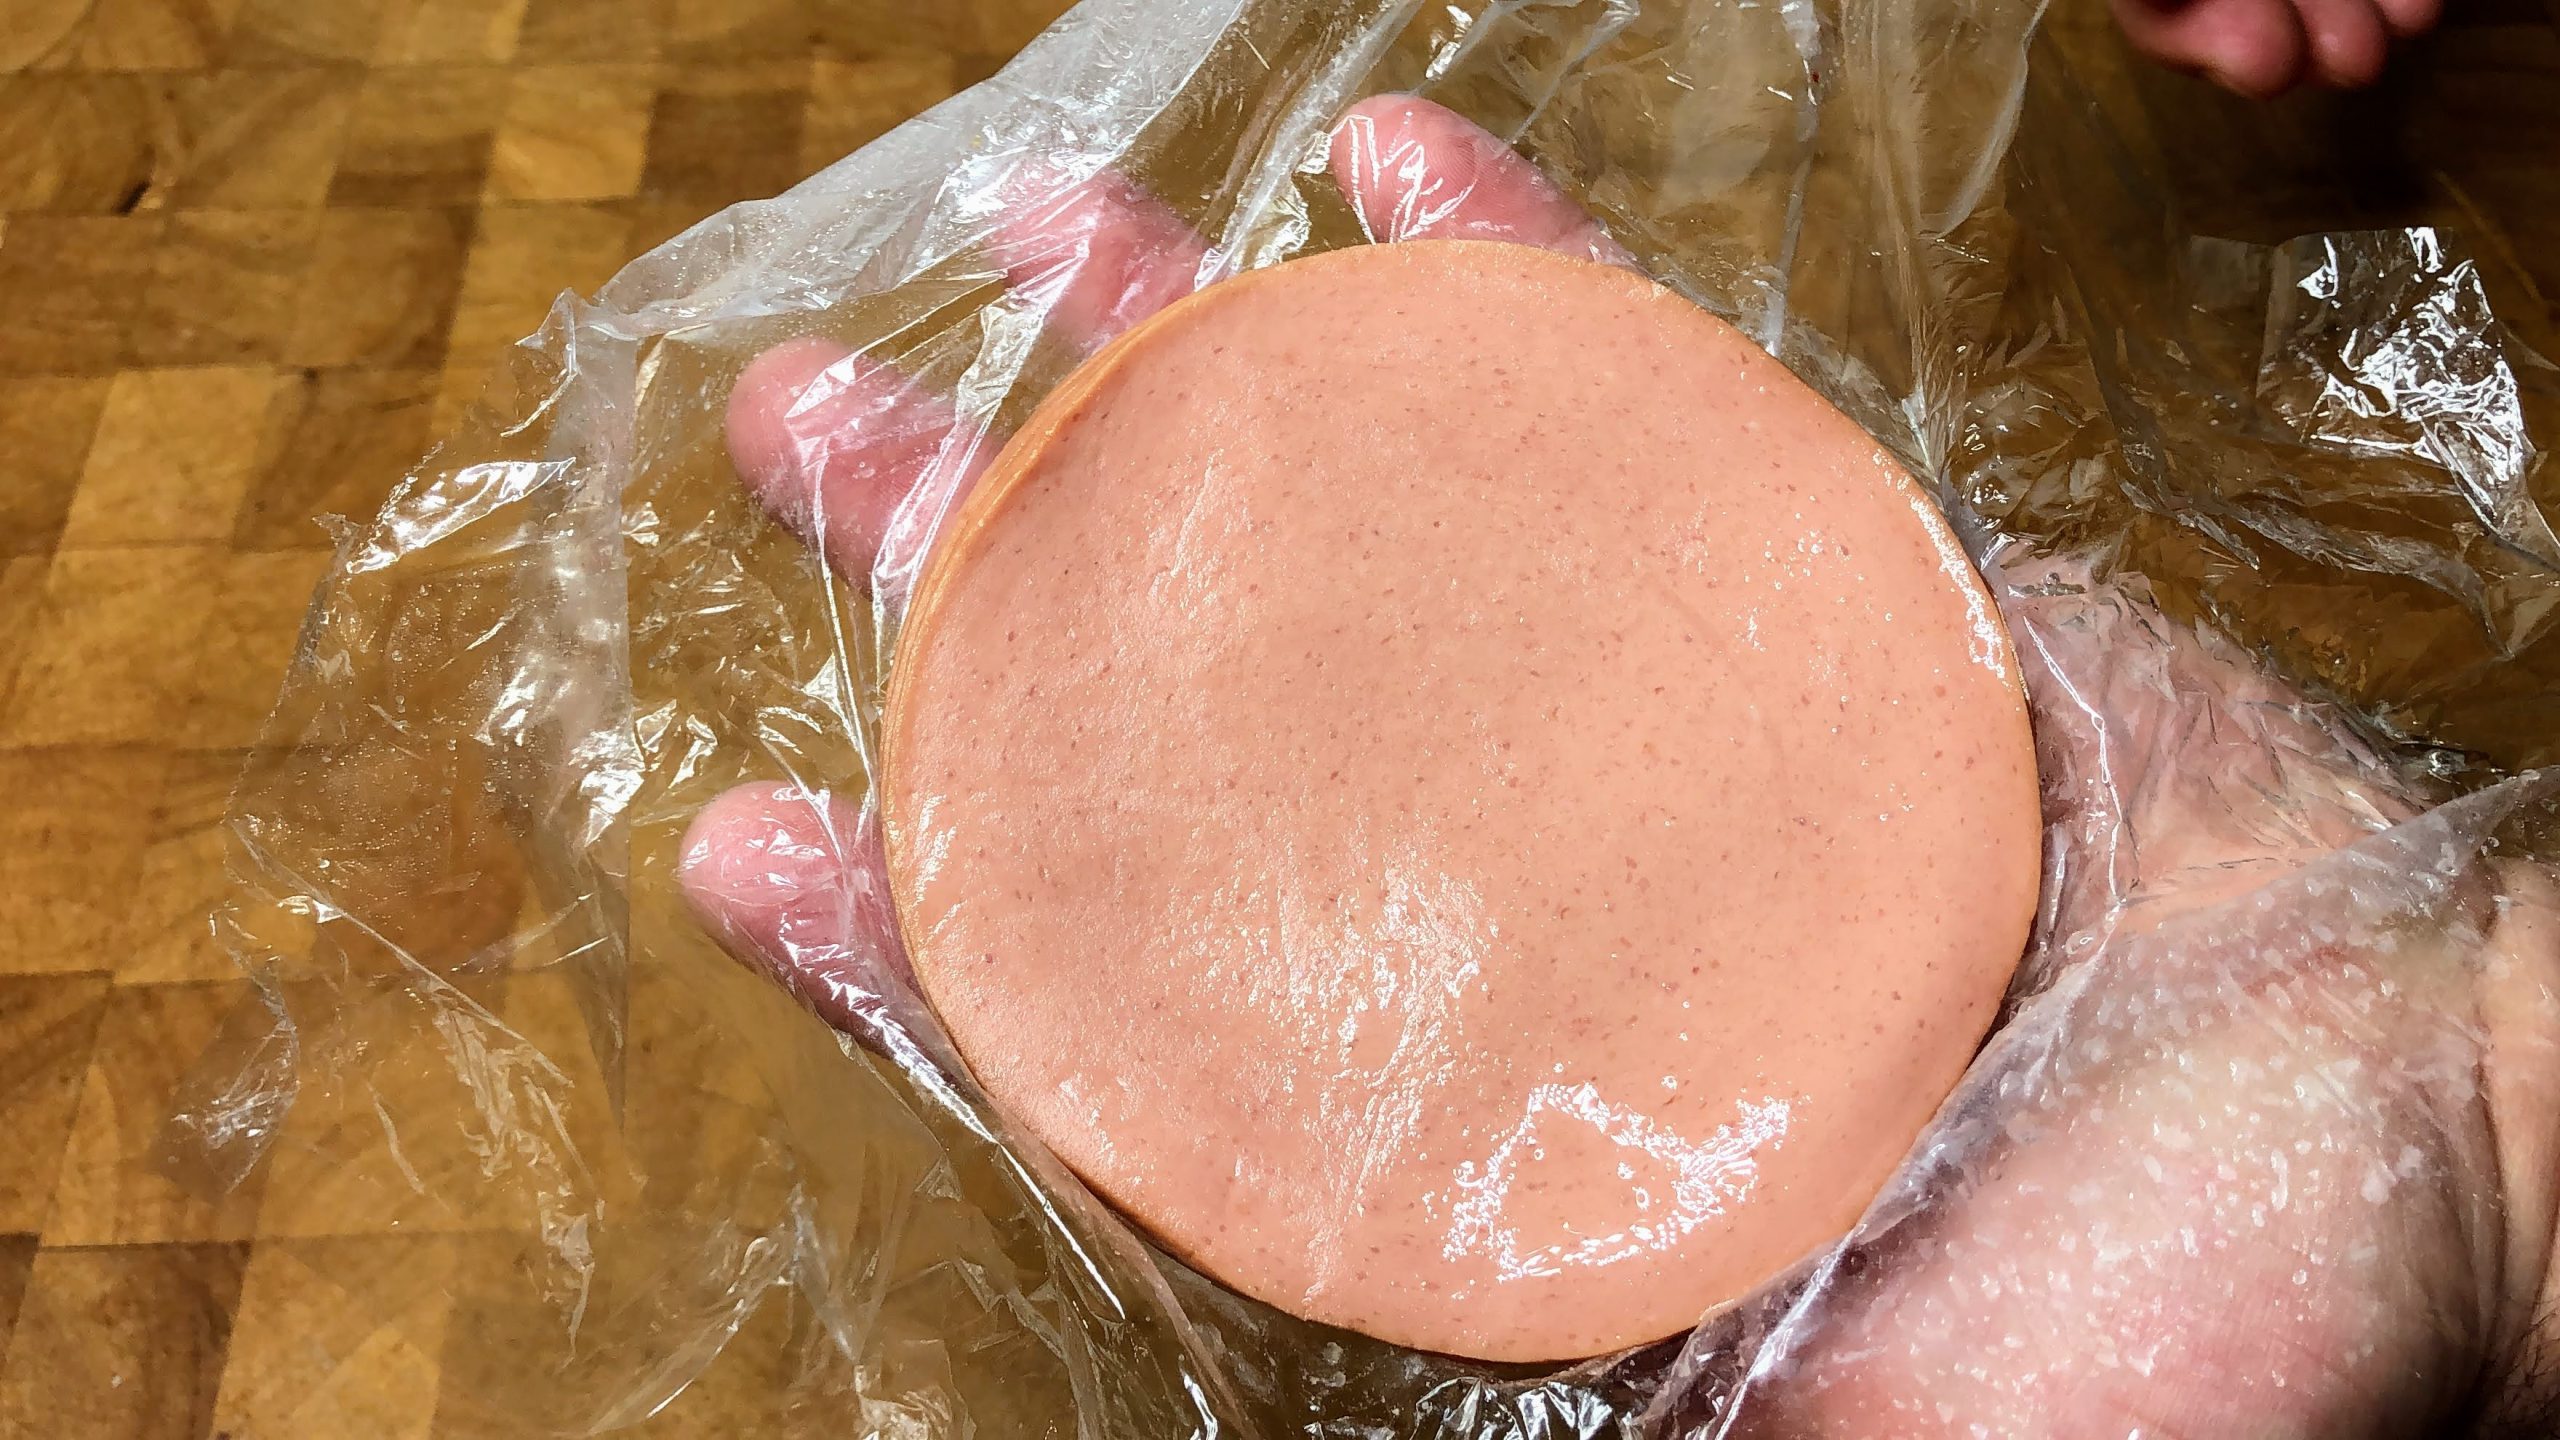 defrosted stack of bologna being held on a sheet of plastic wrap